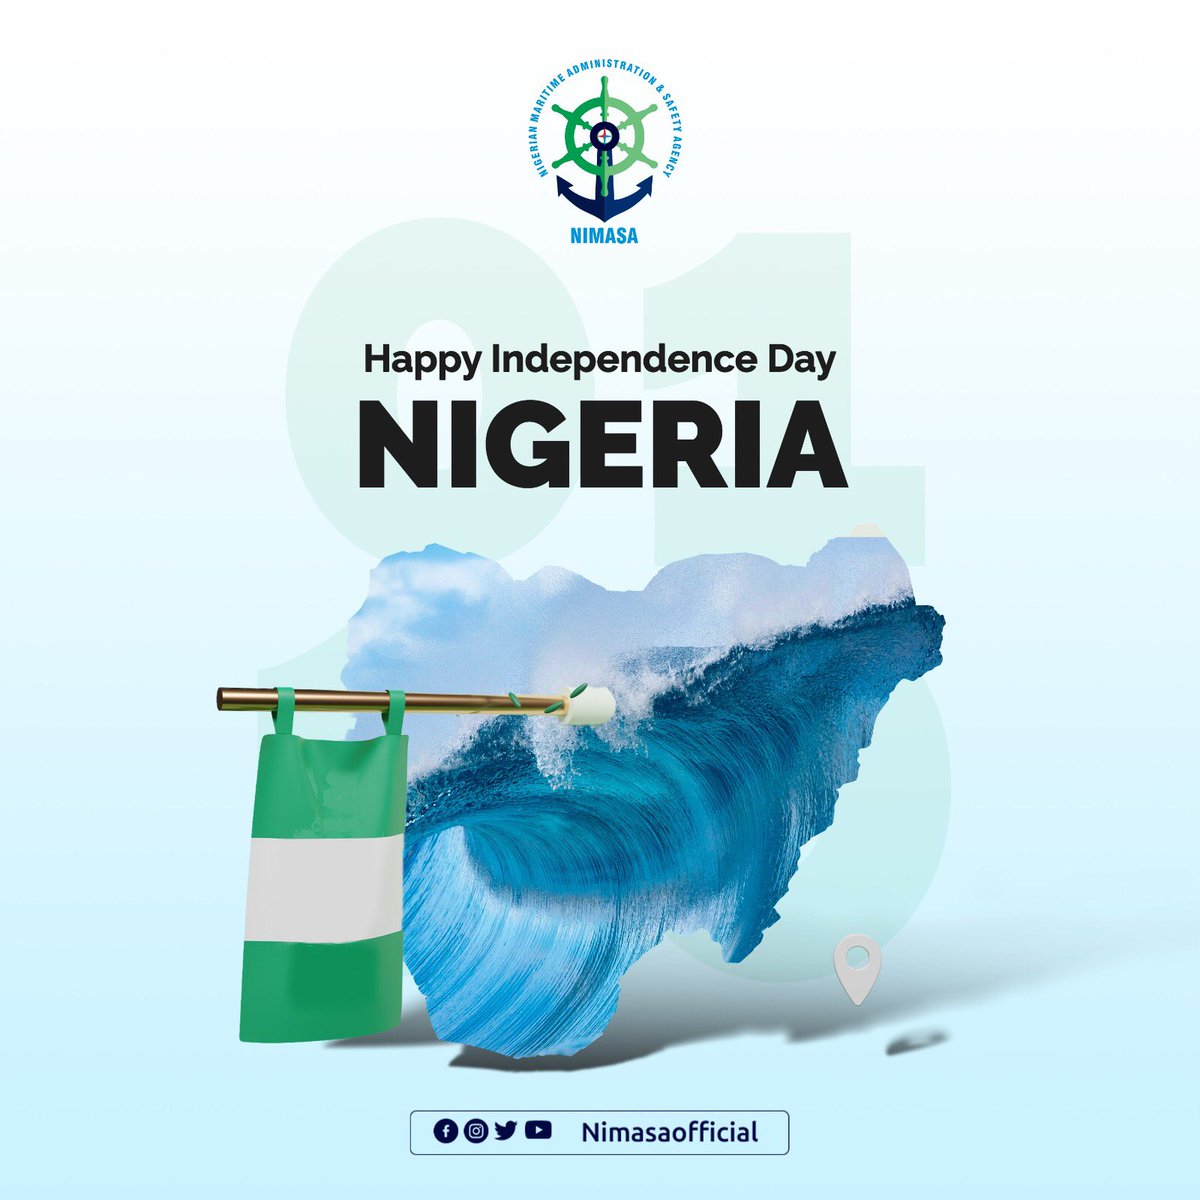 Today we at #TeamNIMASA join the rest of the world to celebrate #Nigeria on her Independence Day Celebration. #OnePeople #GreatNation.